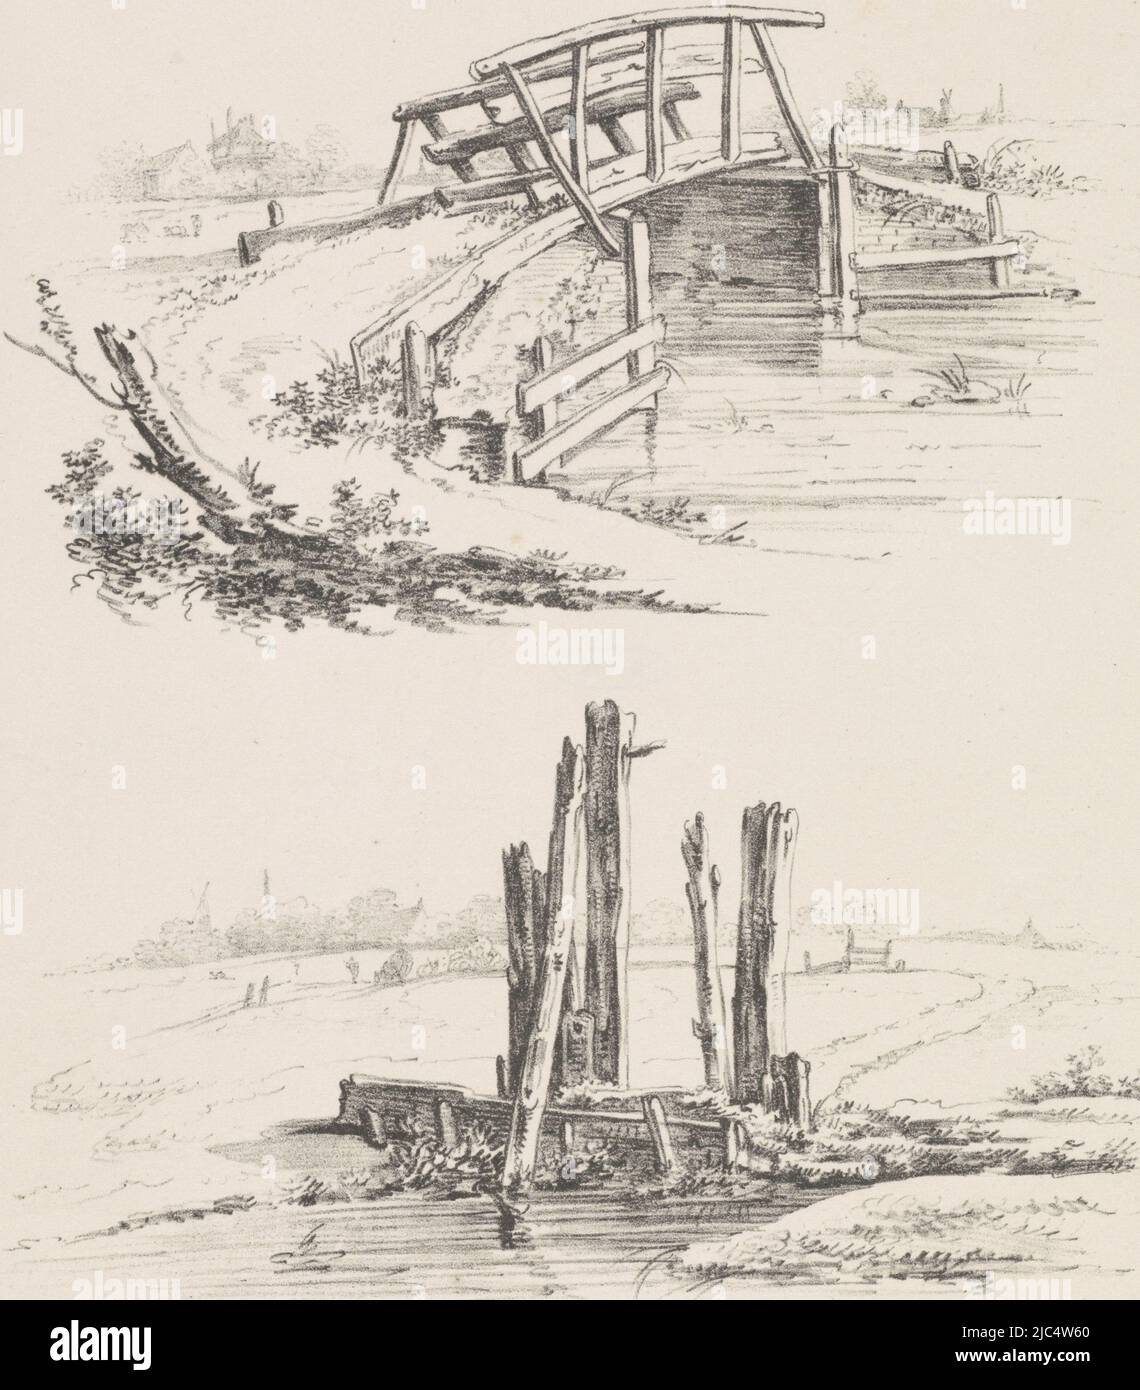 In the top image, a hay barn, houses and a mill can be seen in the background. The lock is dilapidated., Two representations of a decking and a lock, print maker: Joannes Bemme, Netherlands, 1809 - 1841, paper, h 342 mm × w 245 mm Stock Photo